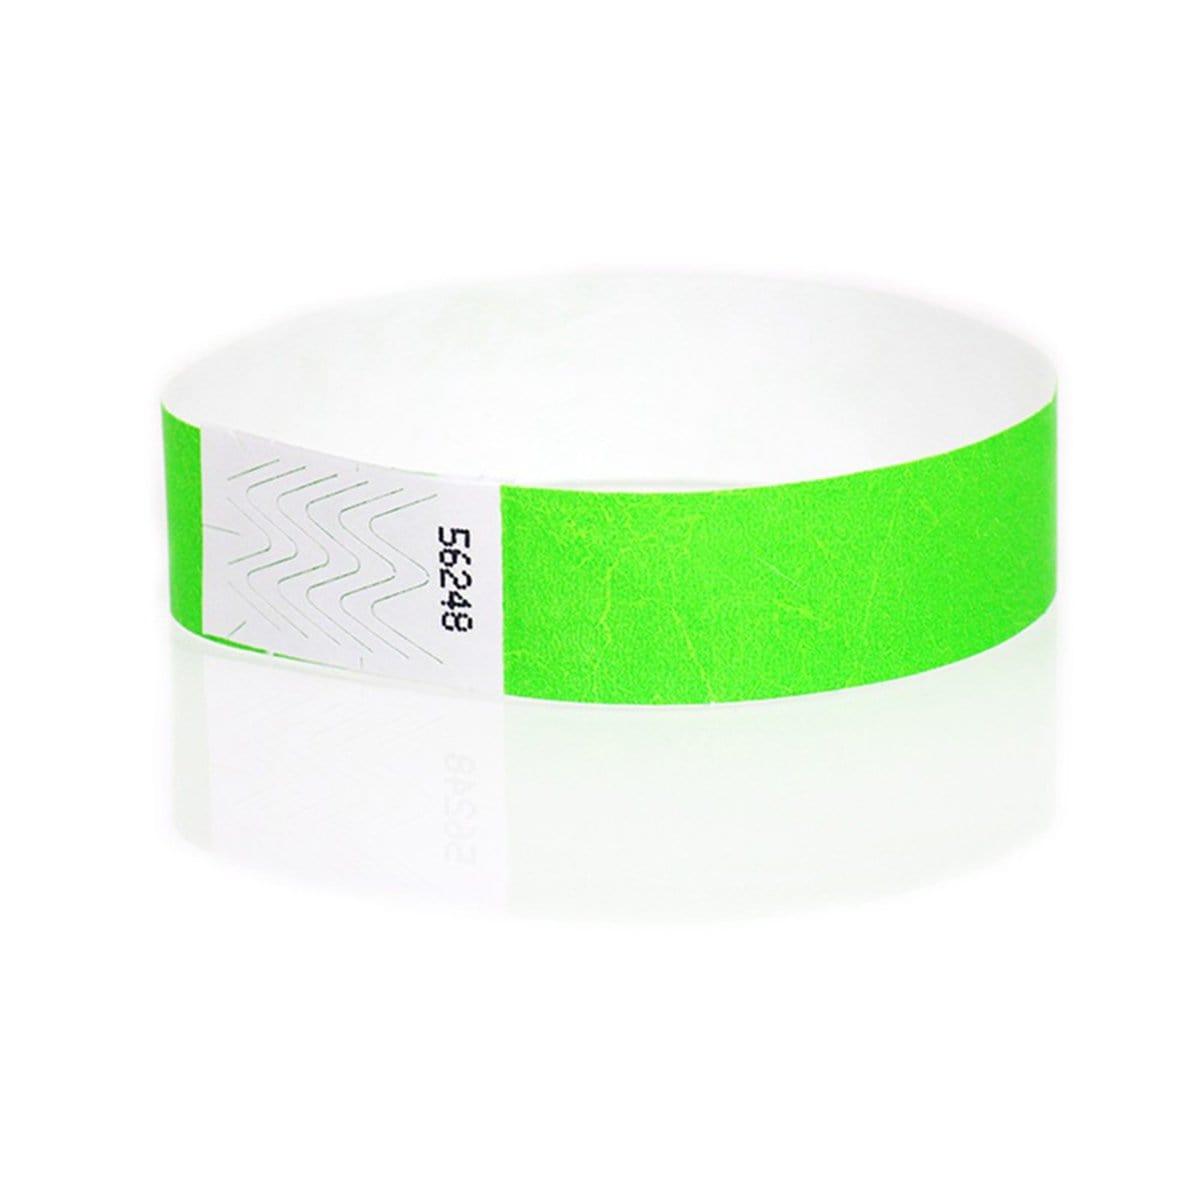 Buy Party Supplies Wristband Supertek 3/4in Neon Lime 100 Pkg. sold at Party Expert